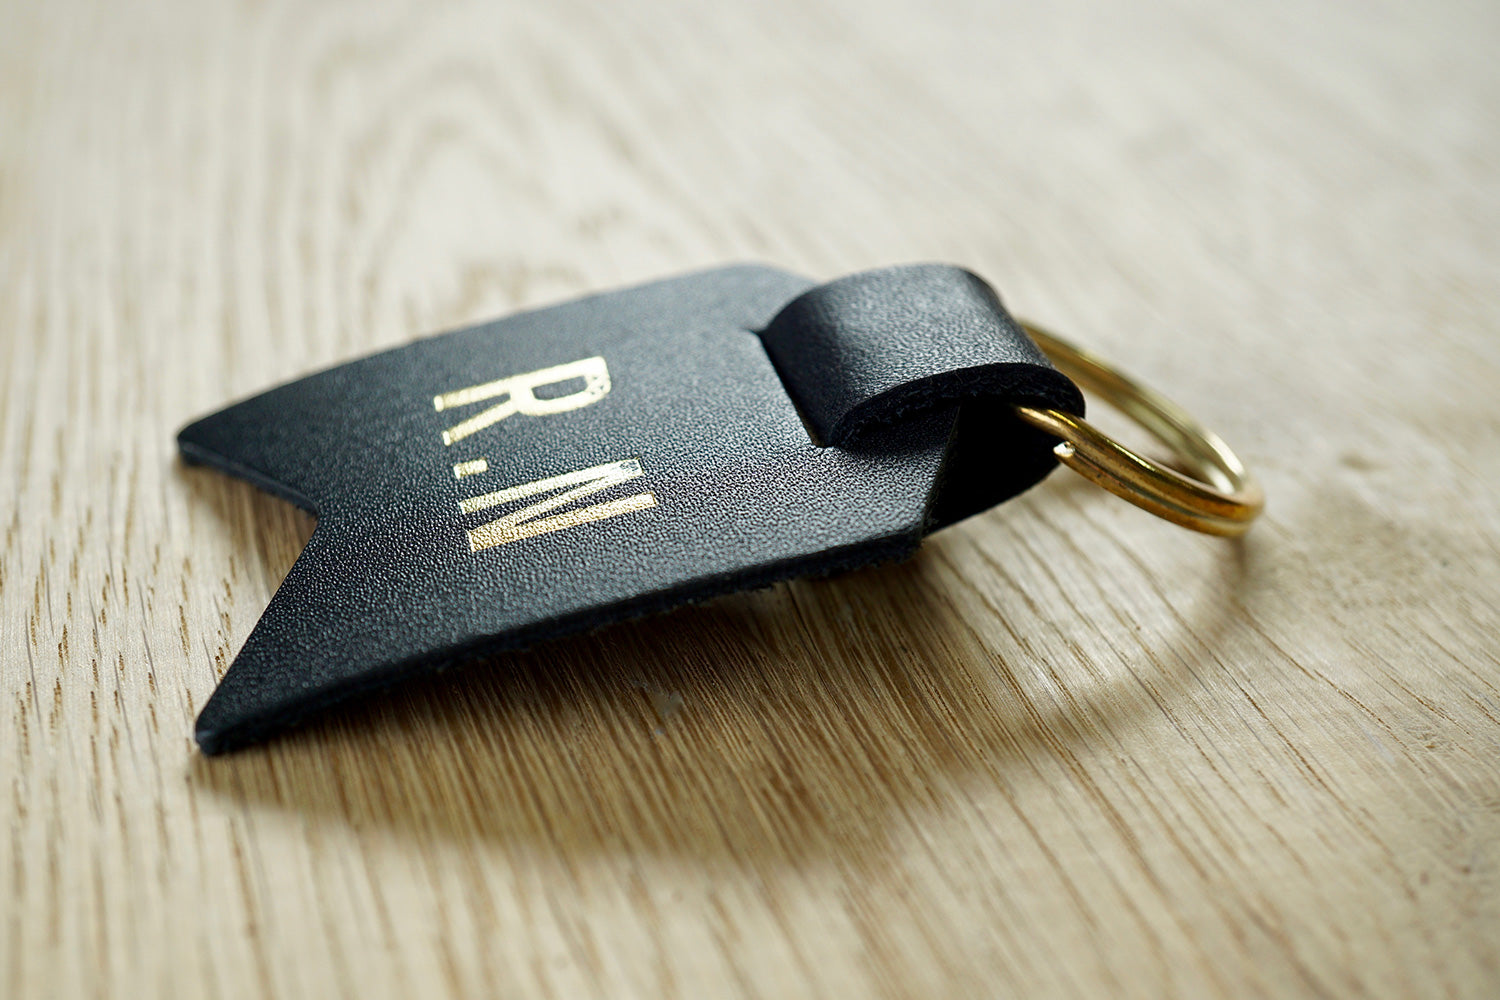 Monogram keychain from Bookshell bindery can monogrammed with 1 or 2 initials